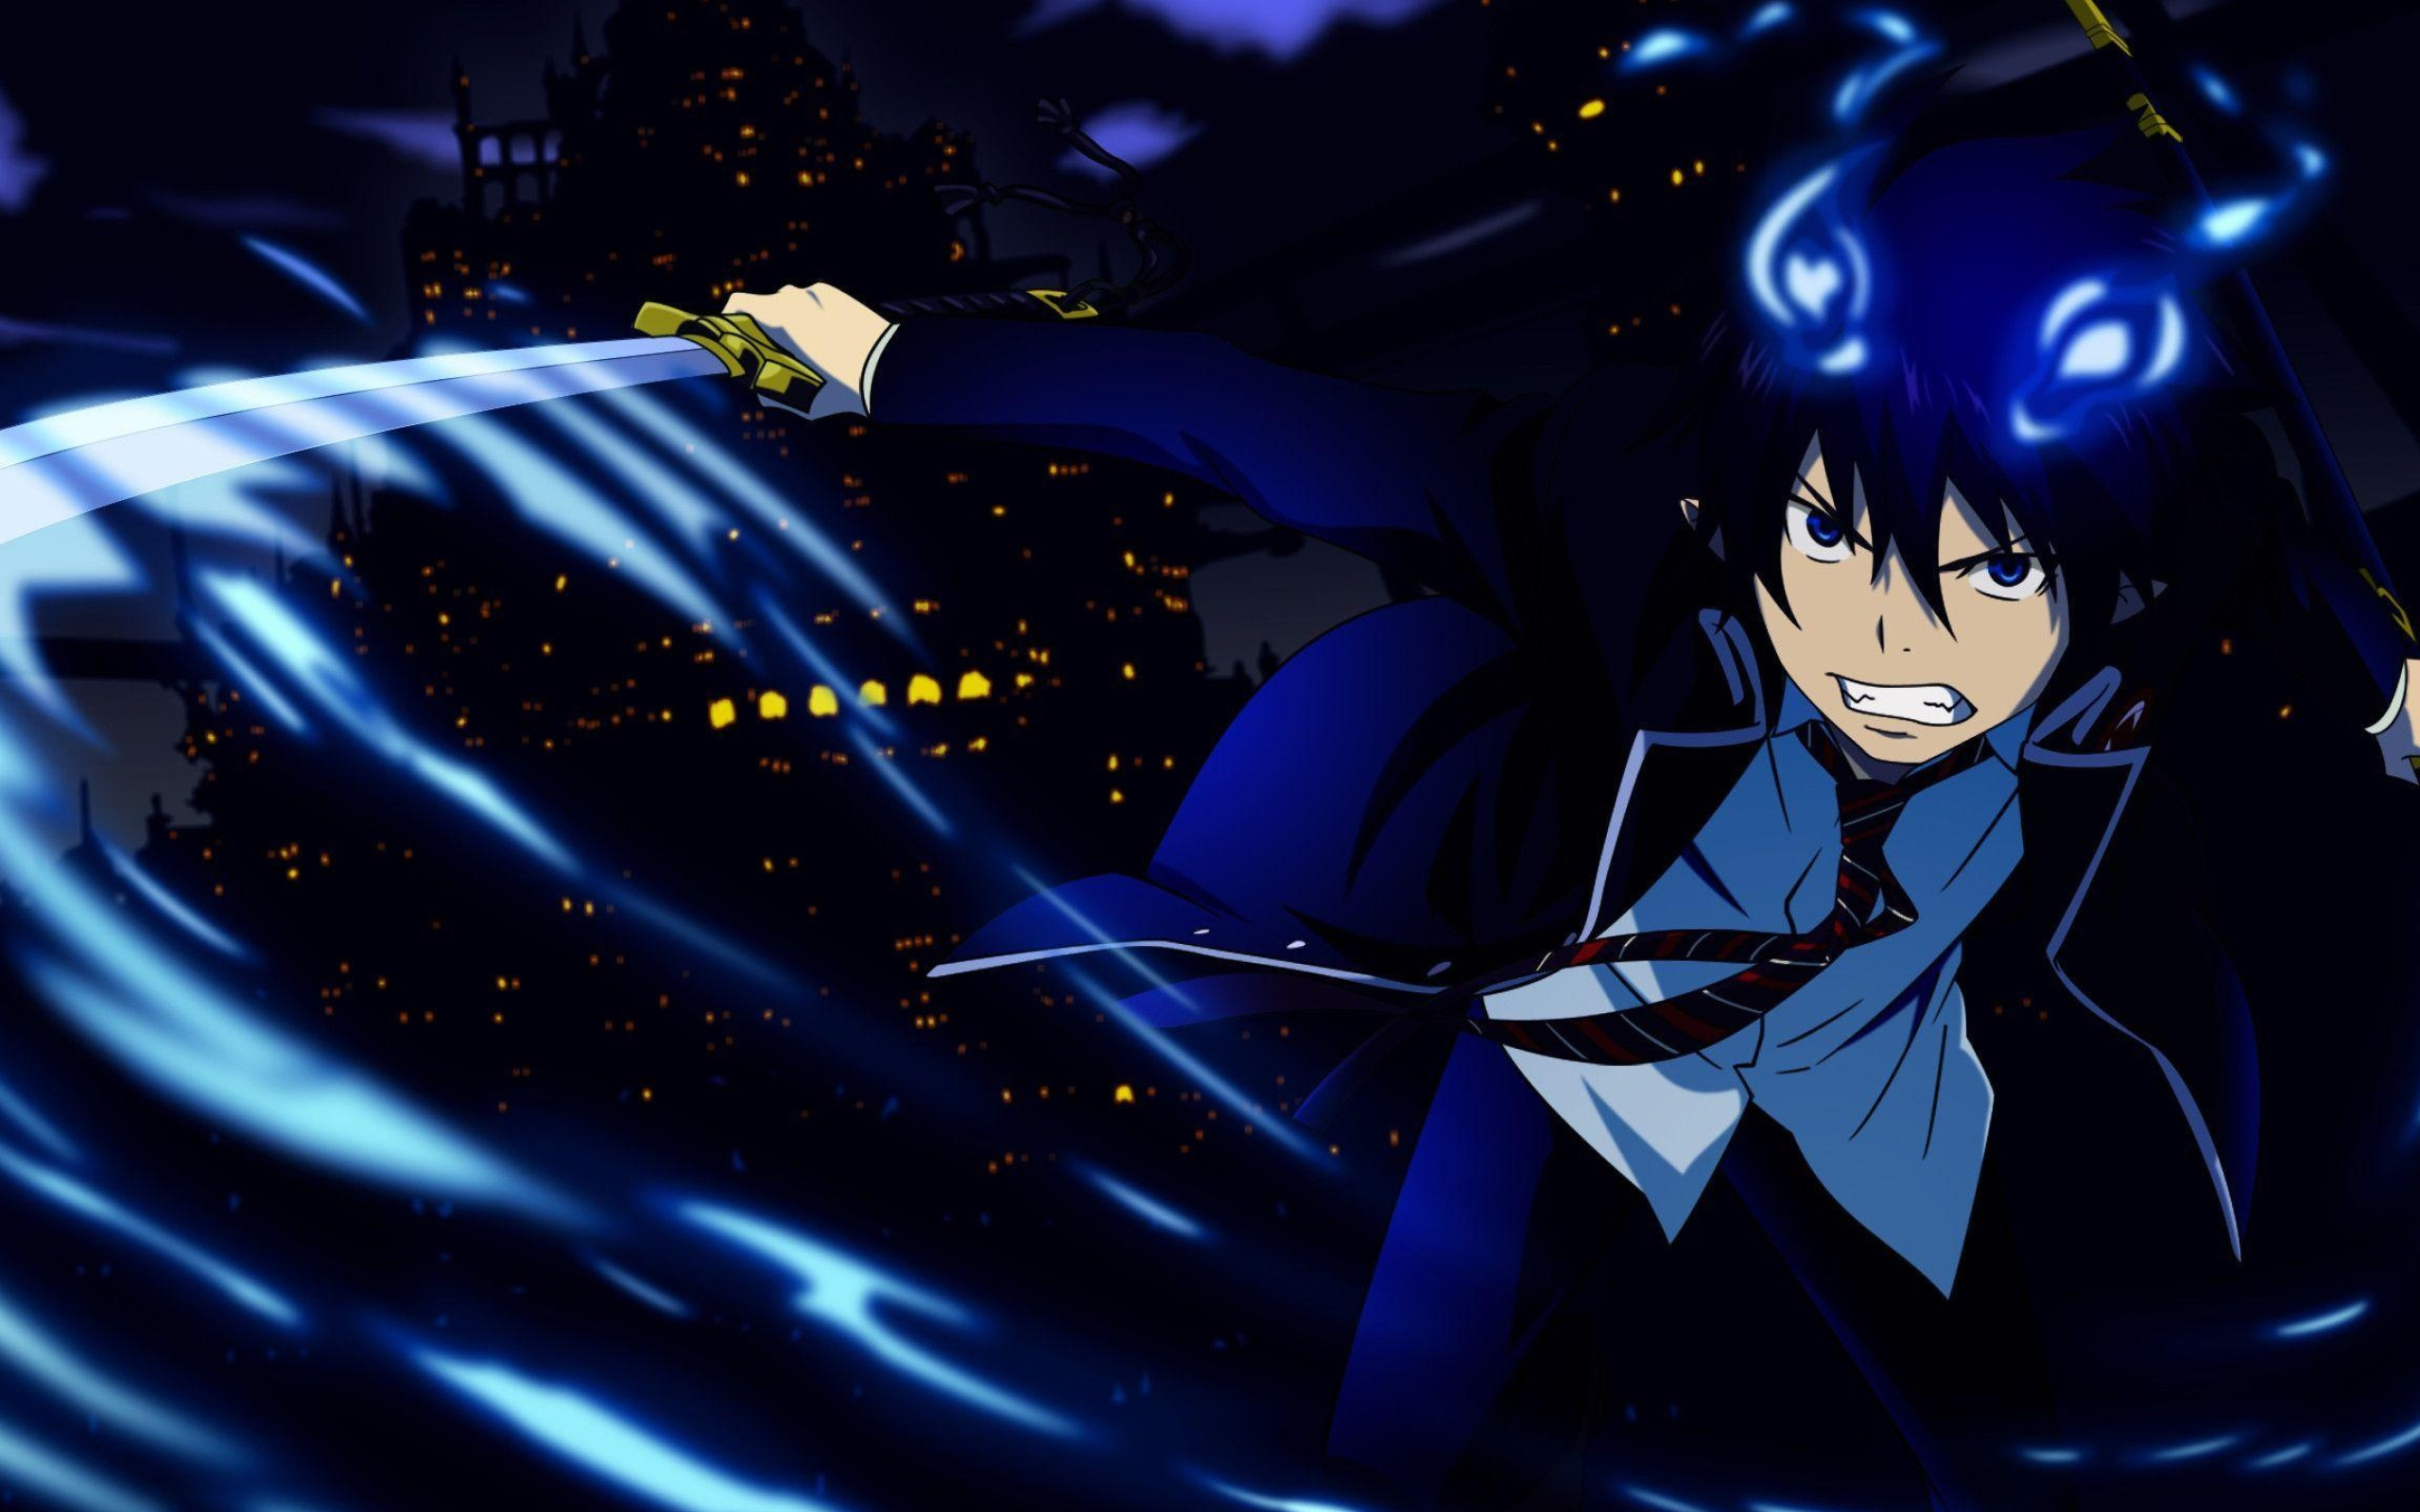 Blue Exorcist wallpapers, Top free backgrounds, Anime demons, Demon slaying, 2560x1600 HD Desktop